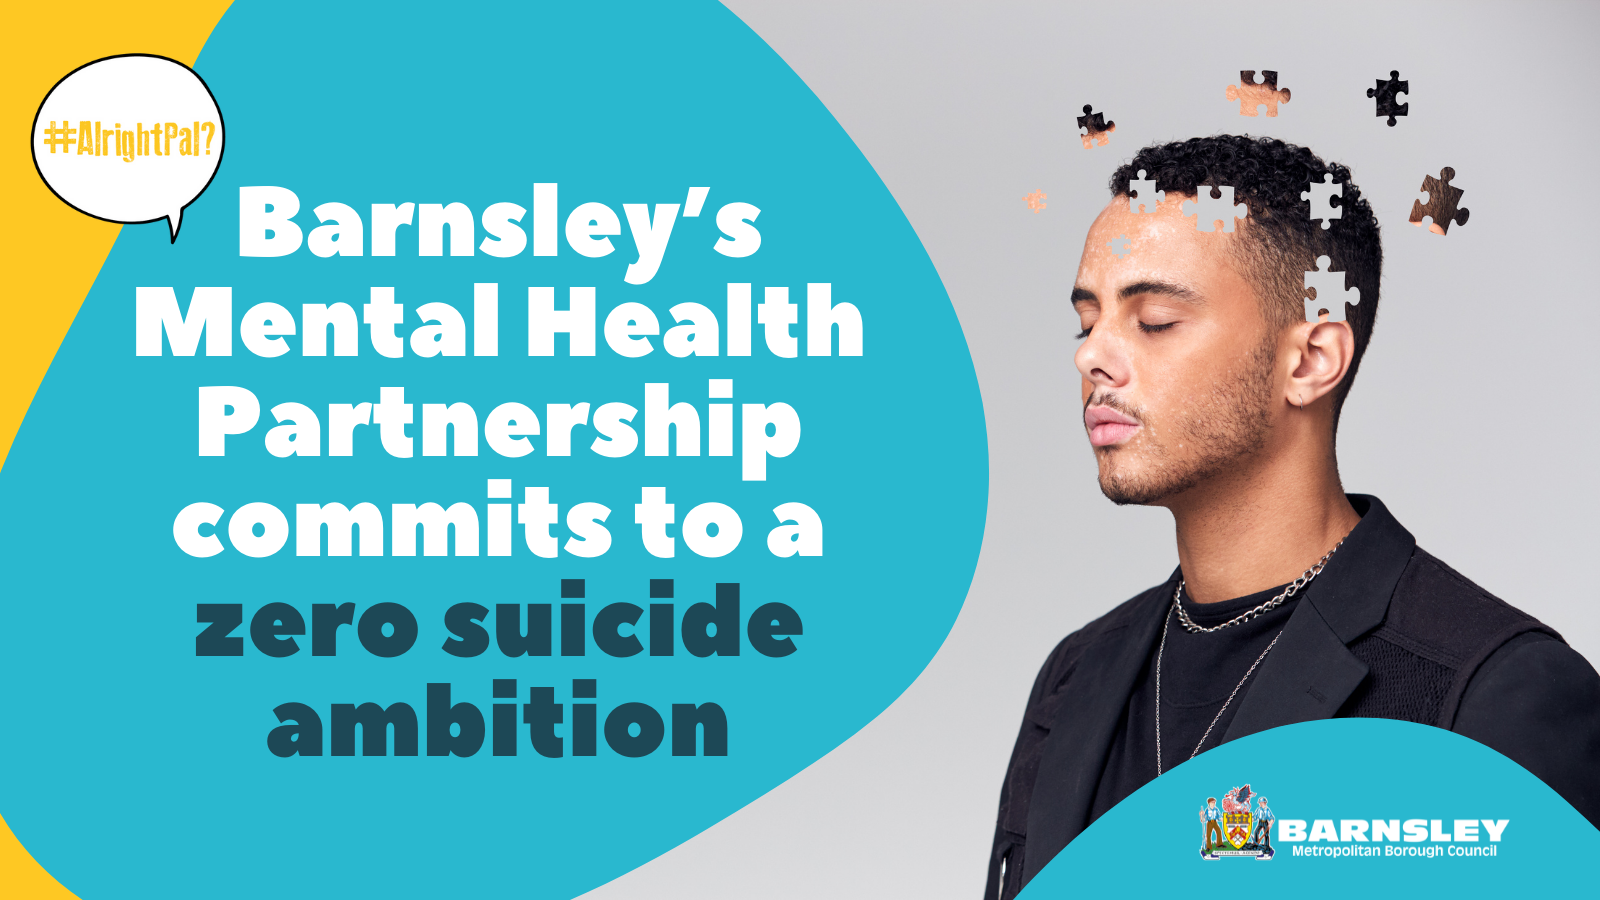 Barnsley’s Mental Health Partnership commits to a zero suicide ambition